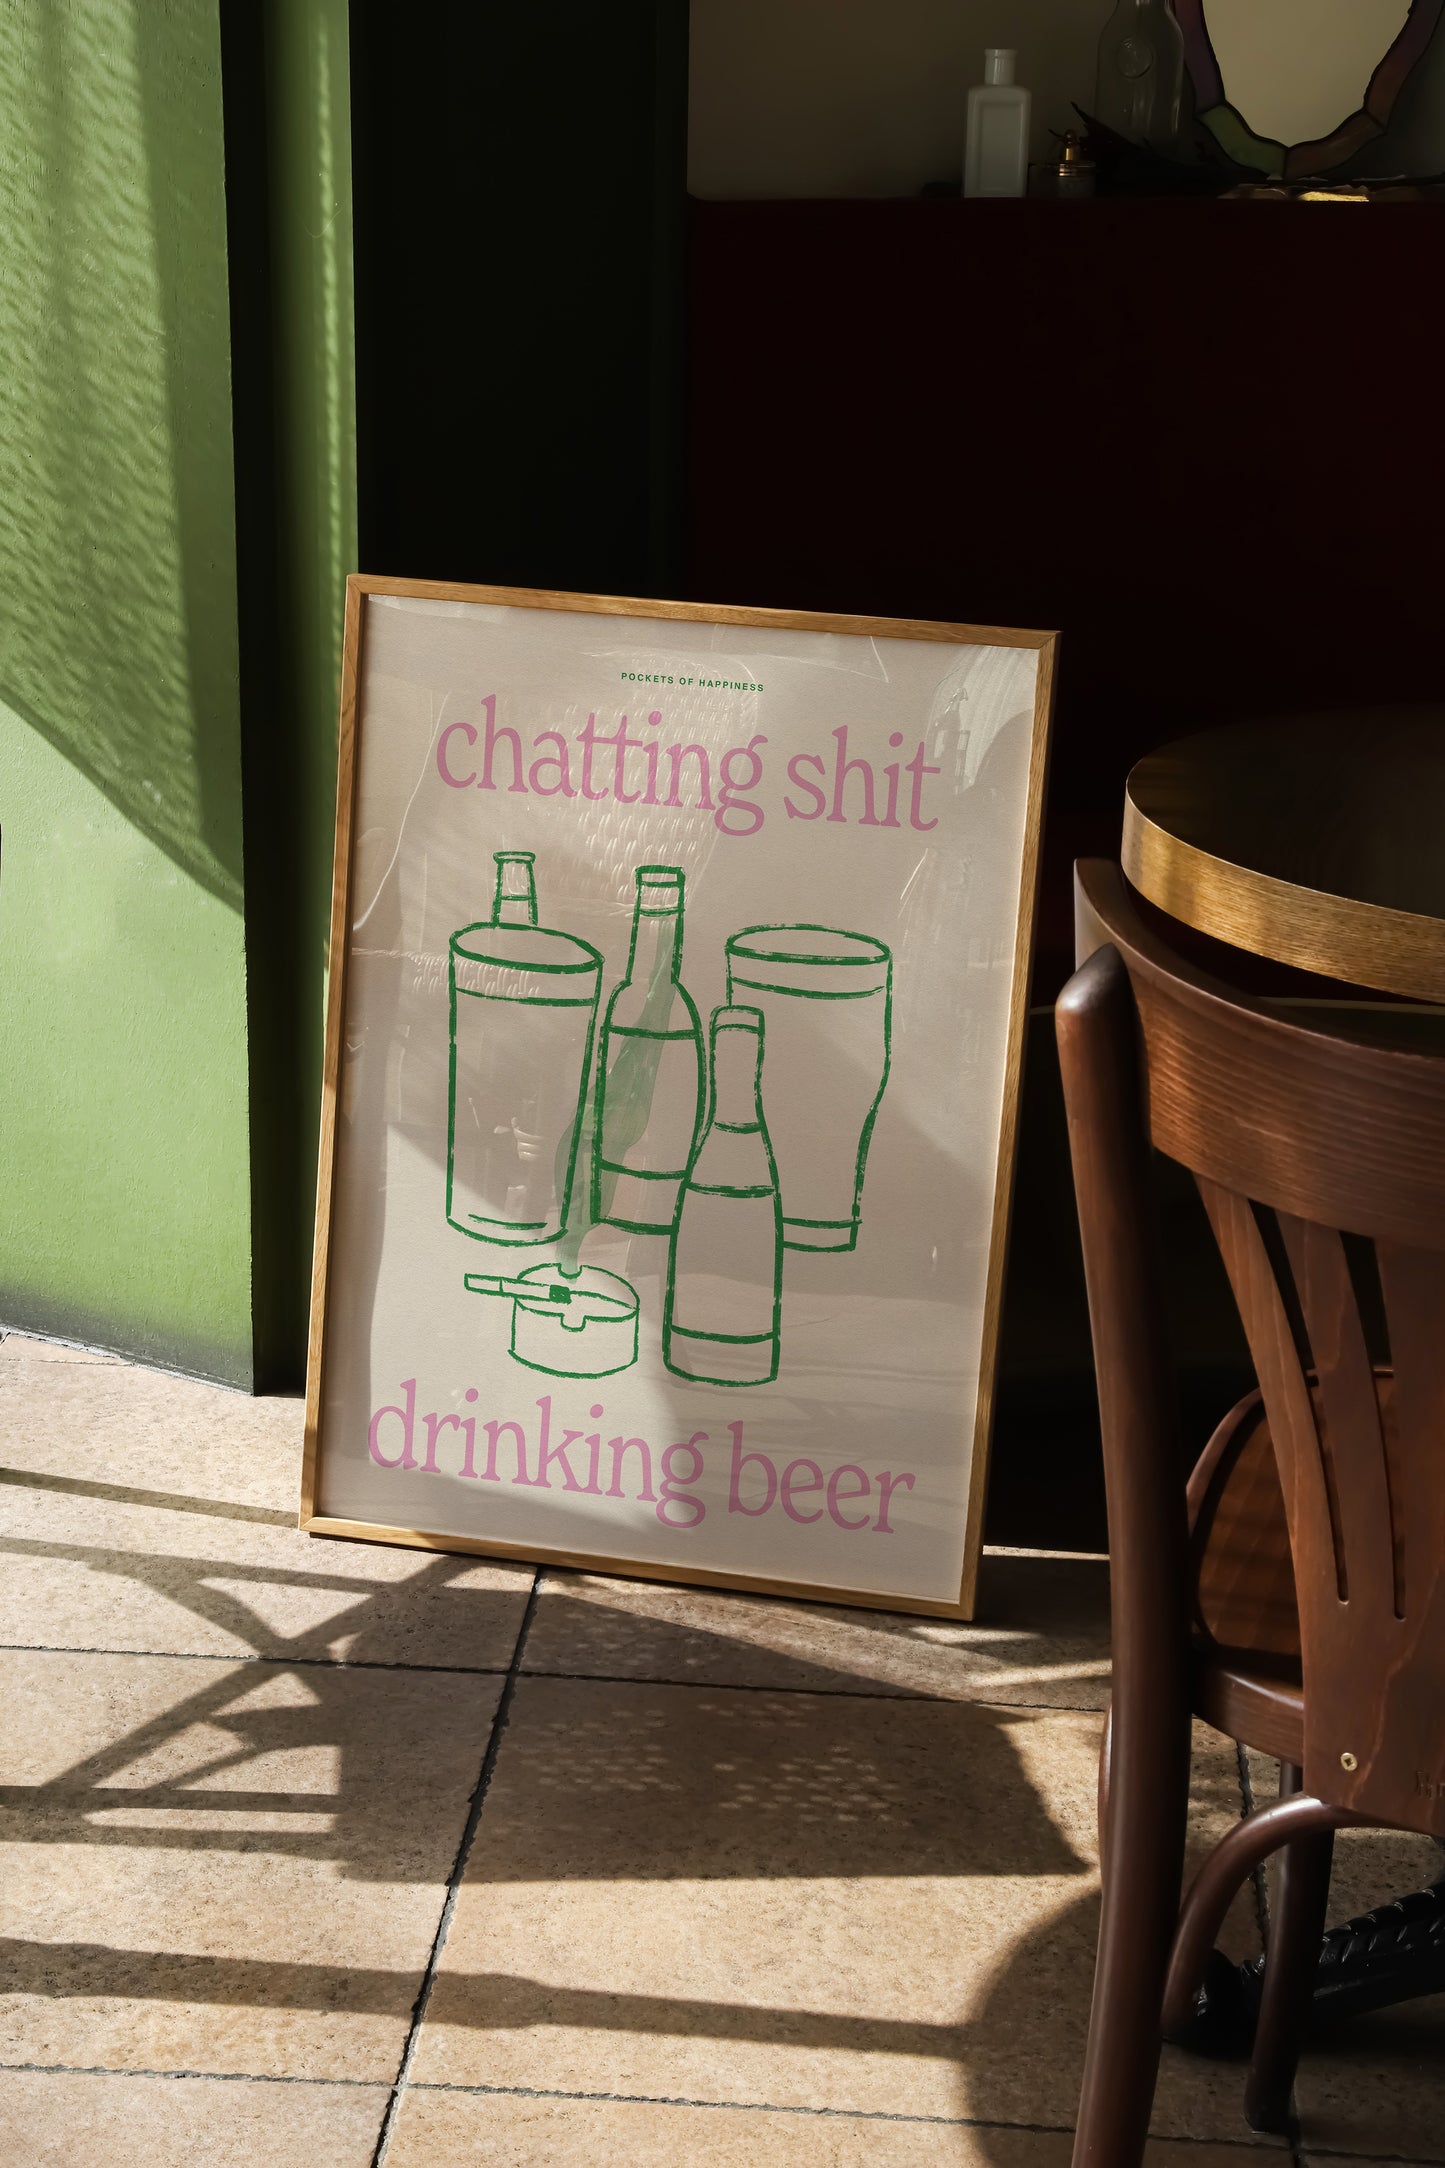 Chatting Shit Drinking Beer Print